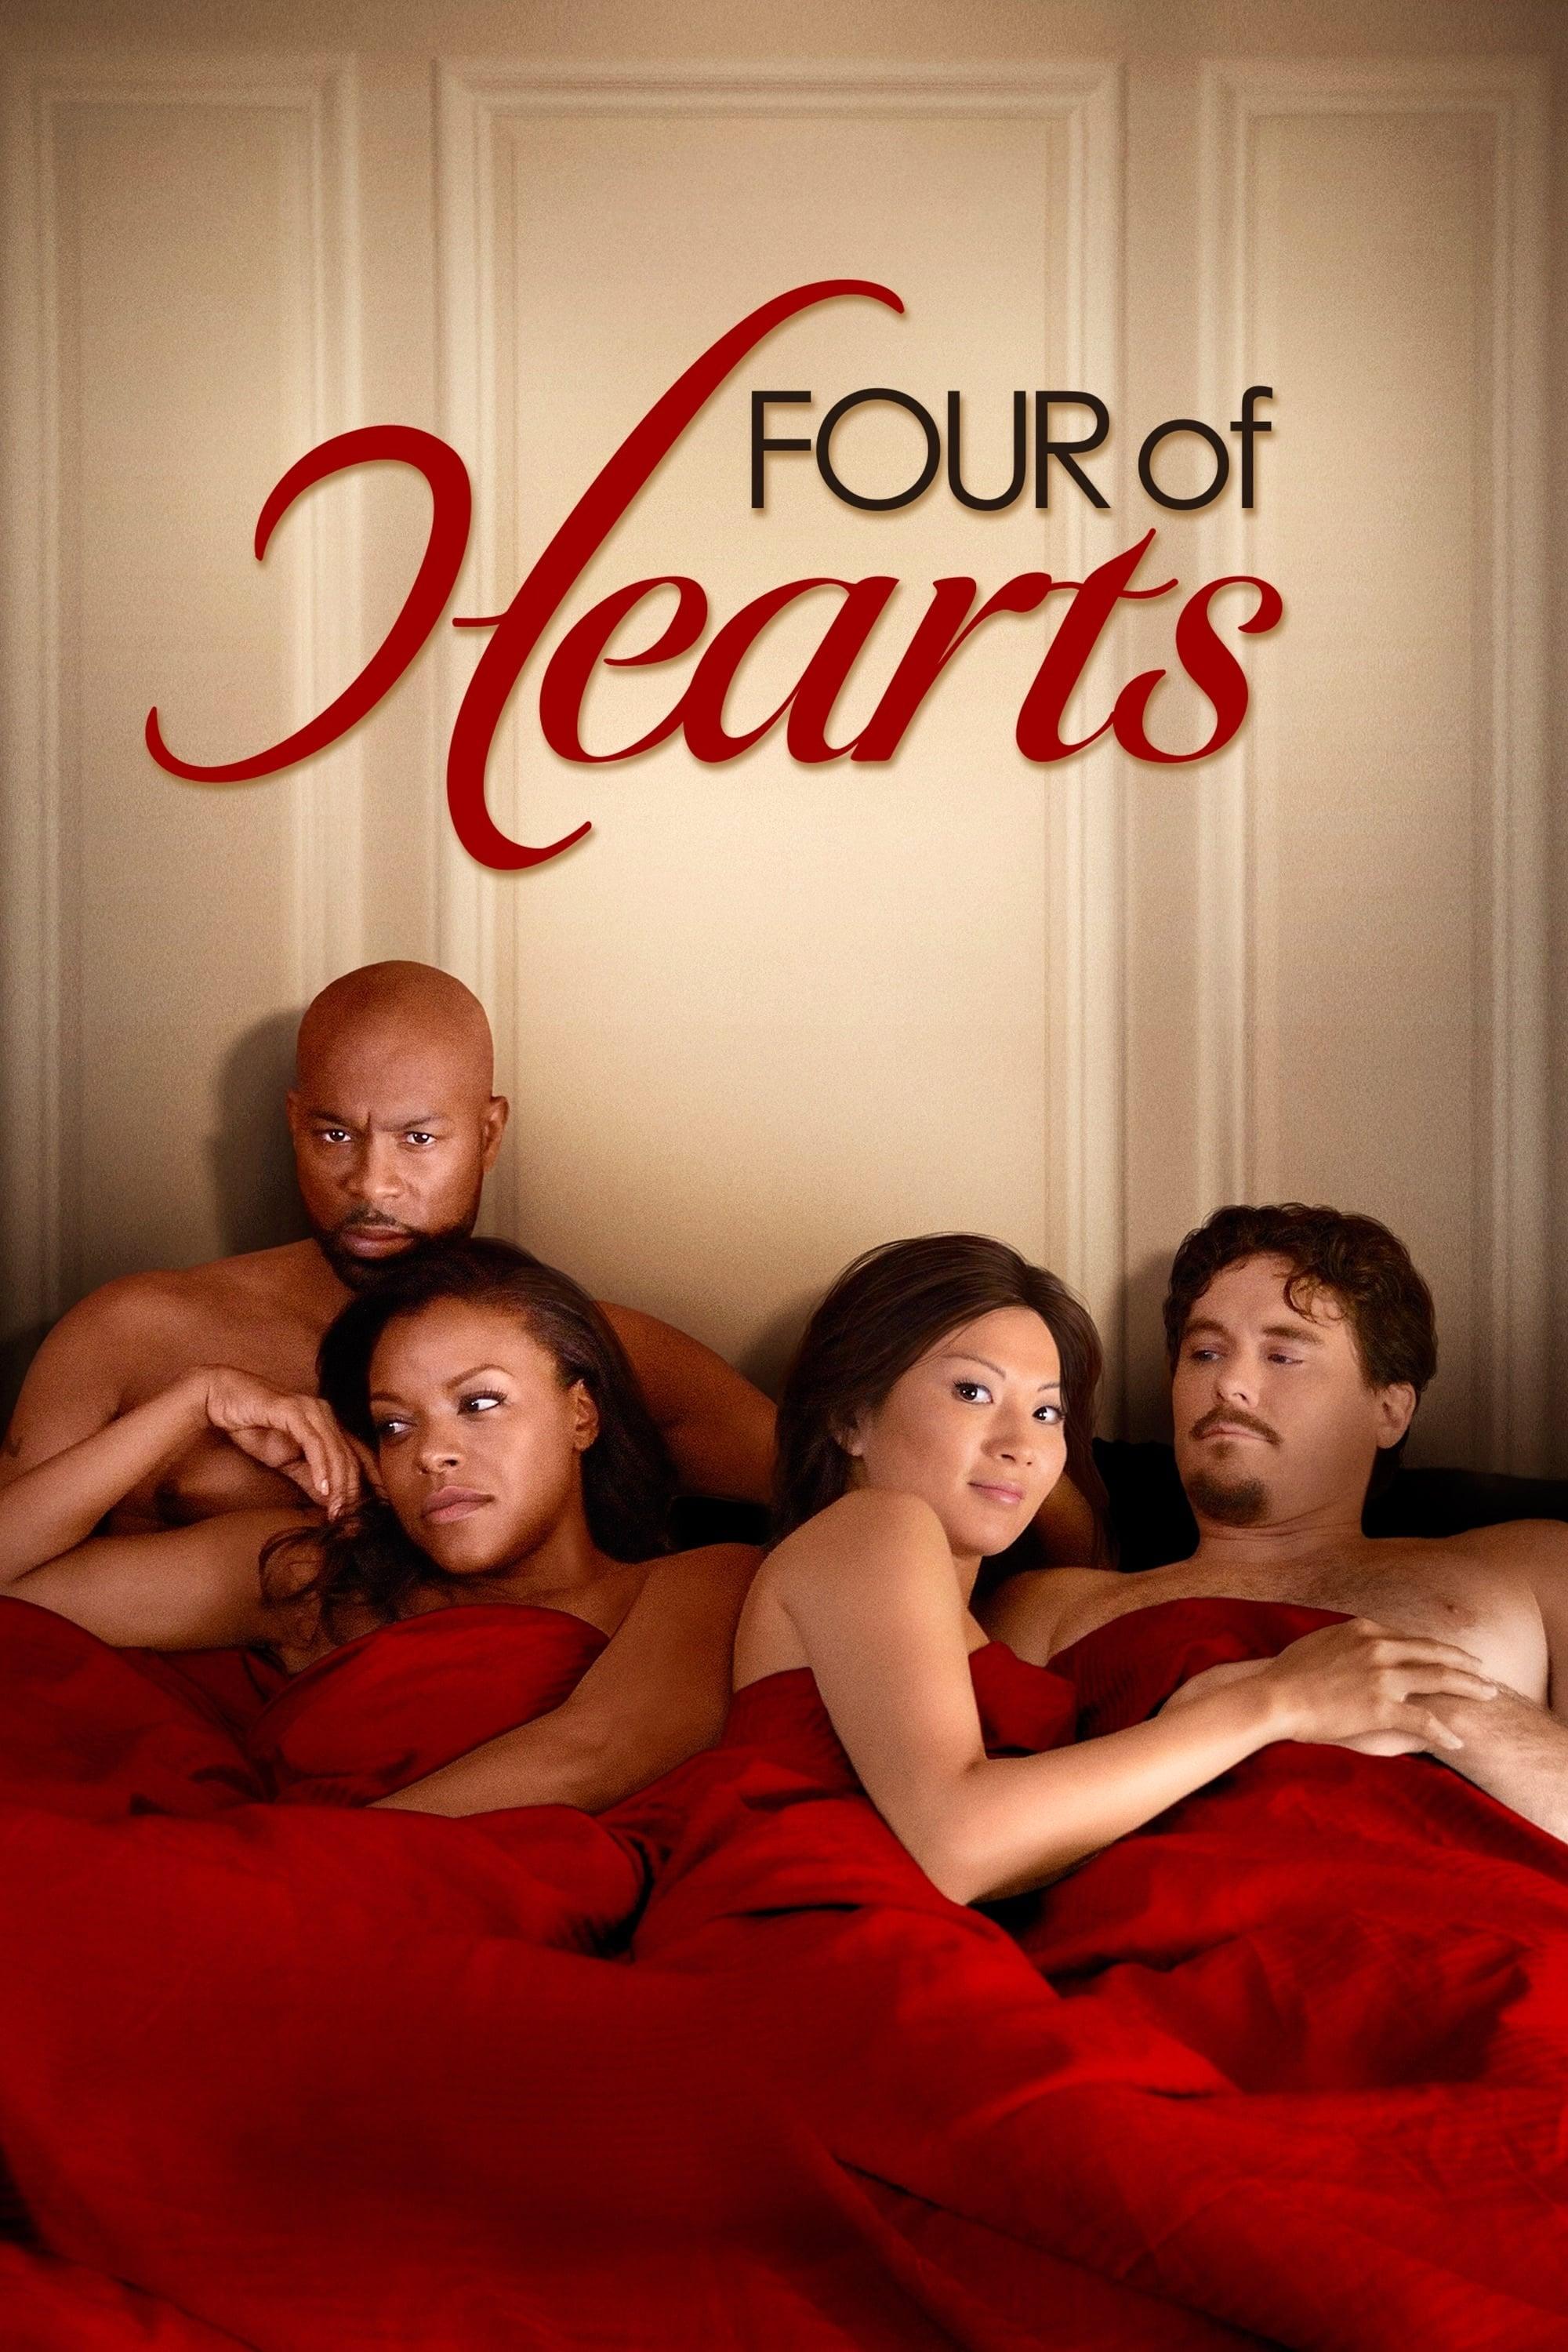 Four of Hearts poster